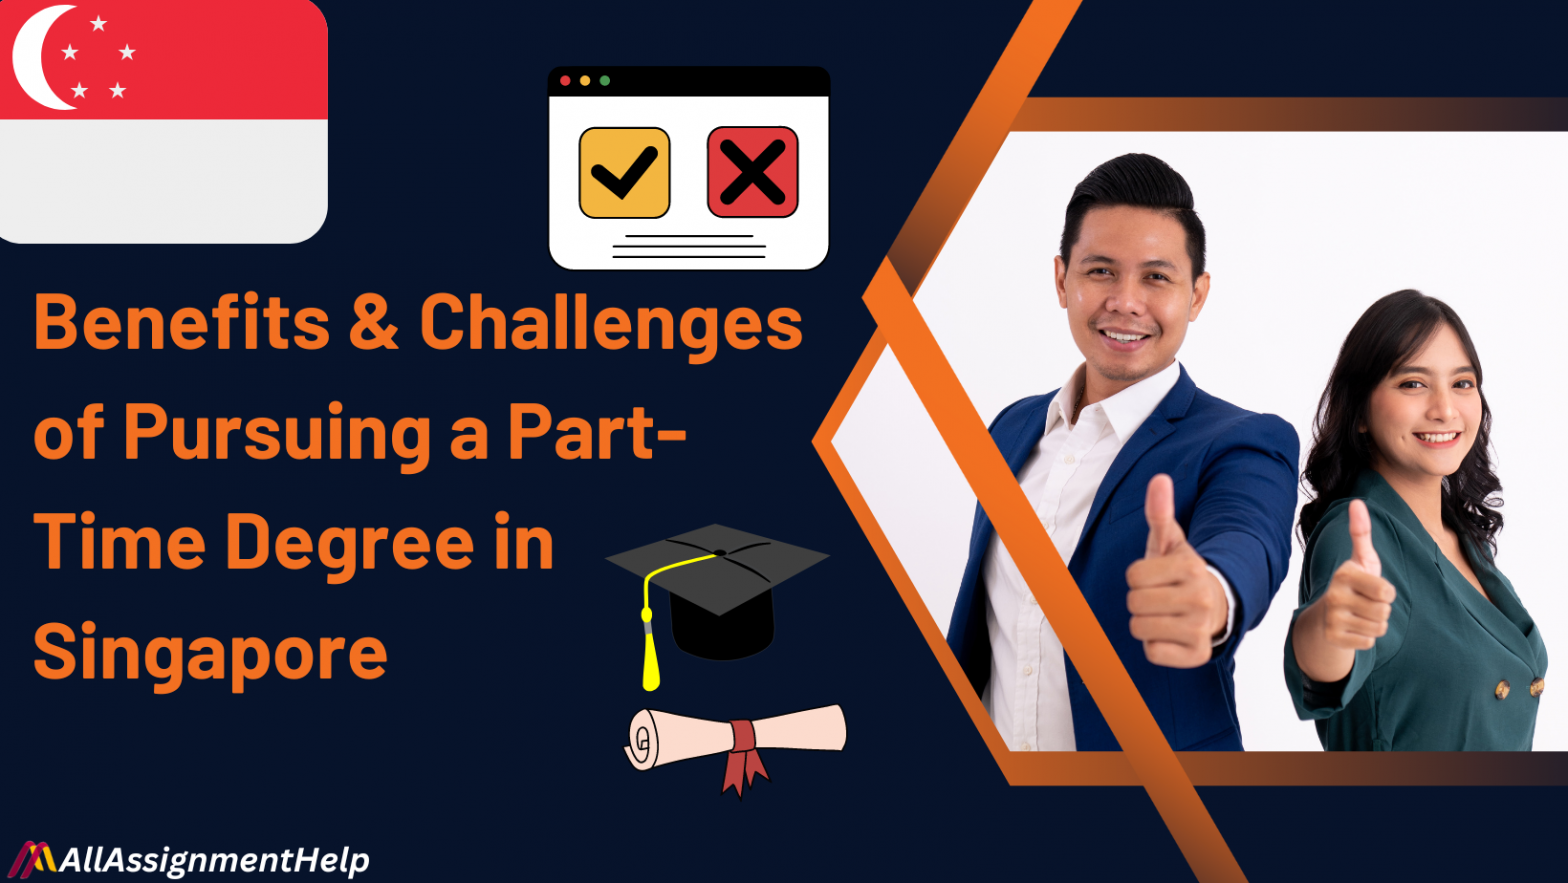 Benefits and Challenges of Pursuing a Part-Time Degree in Singapore